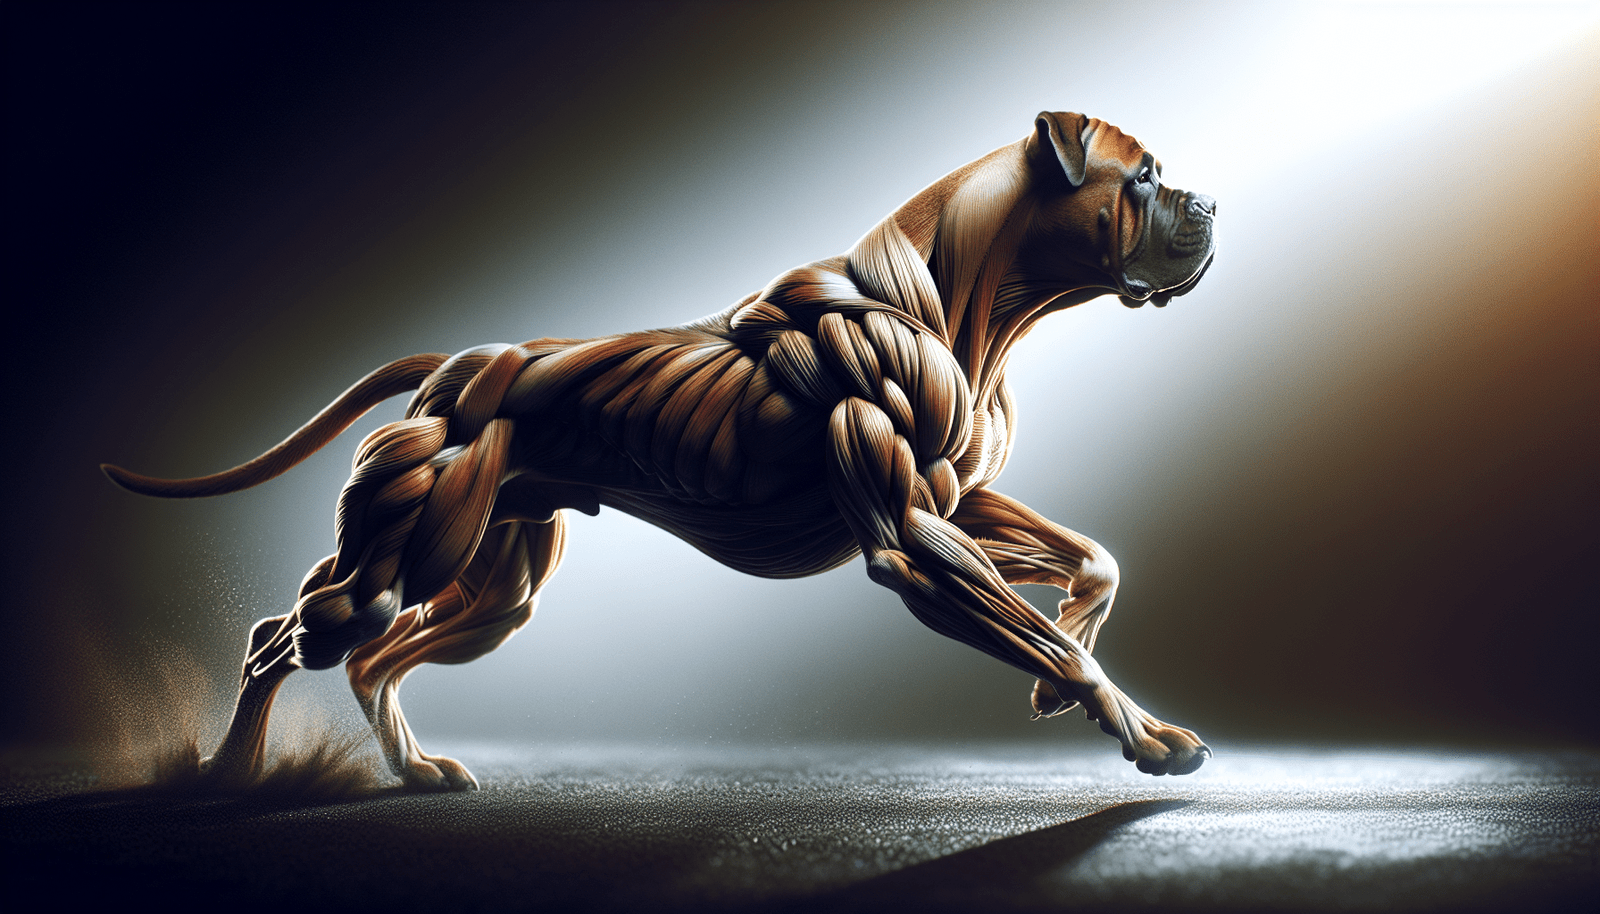 A Comprehensive Guide on How to Build Your Dogs Muscle